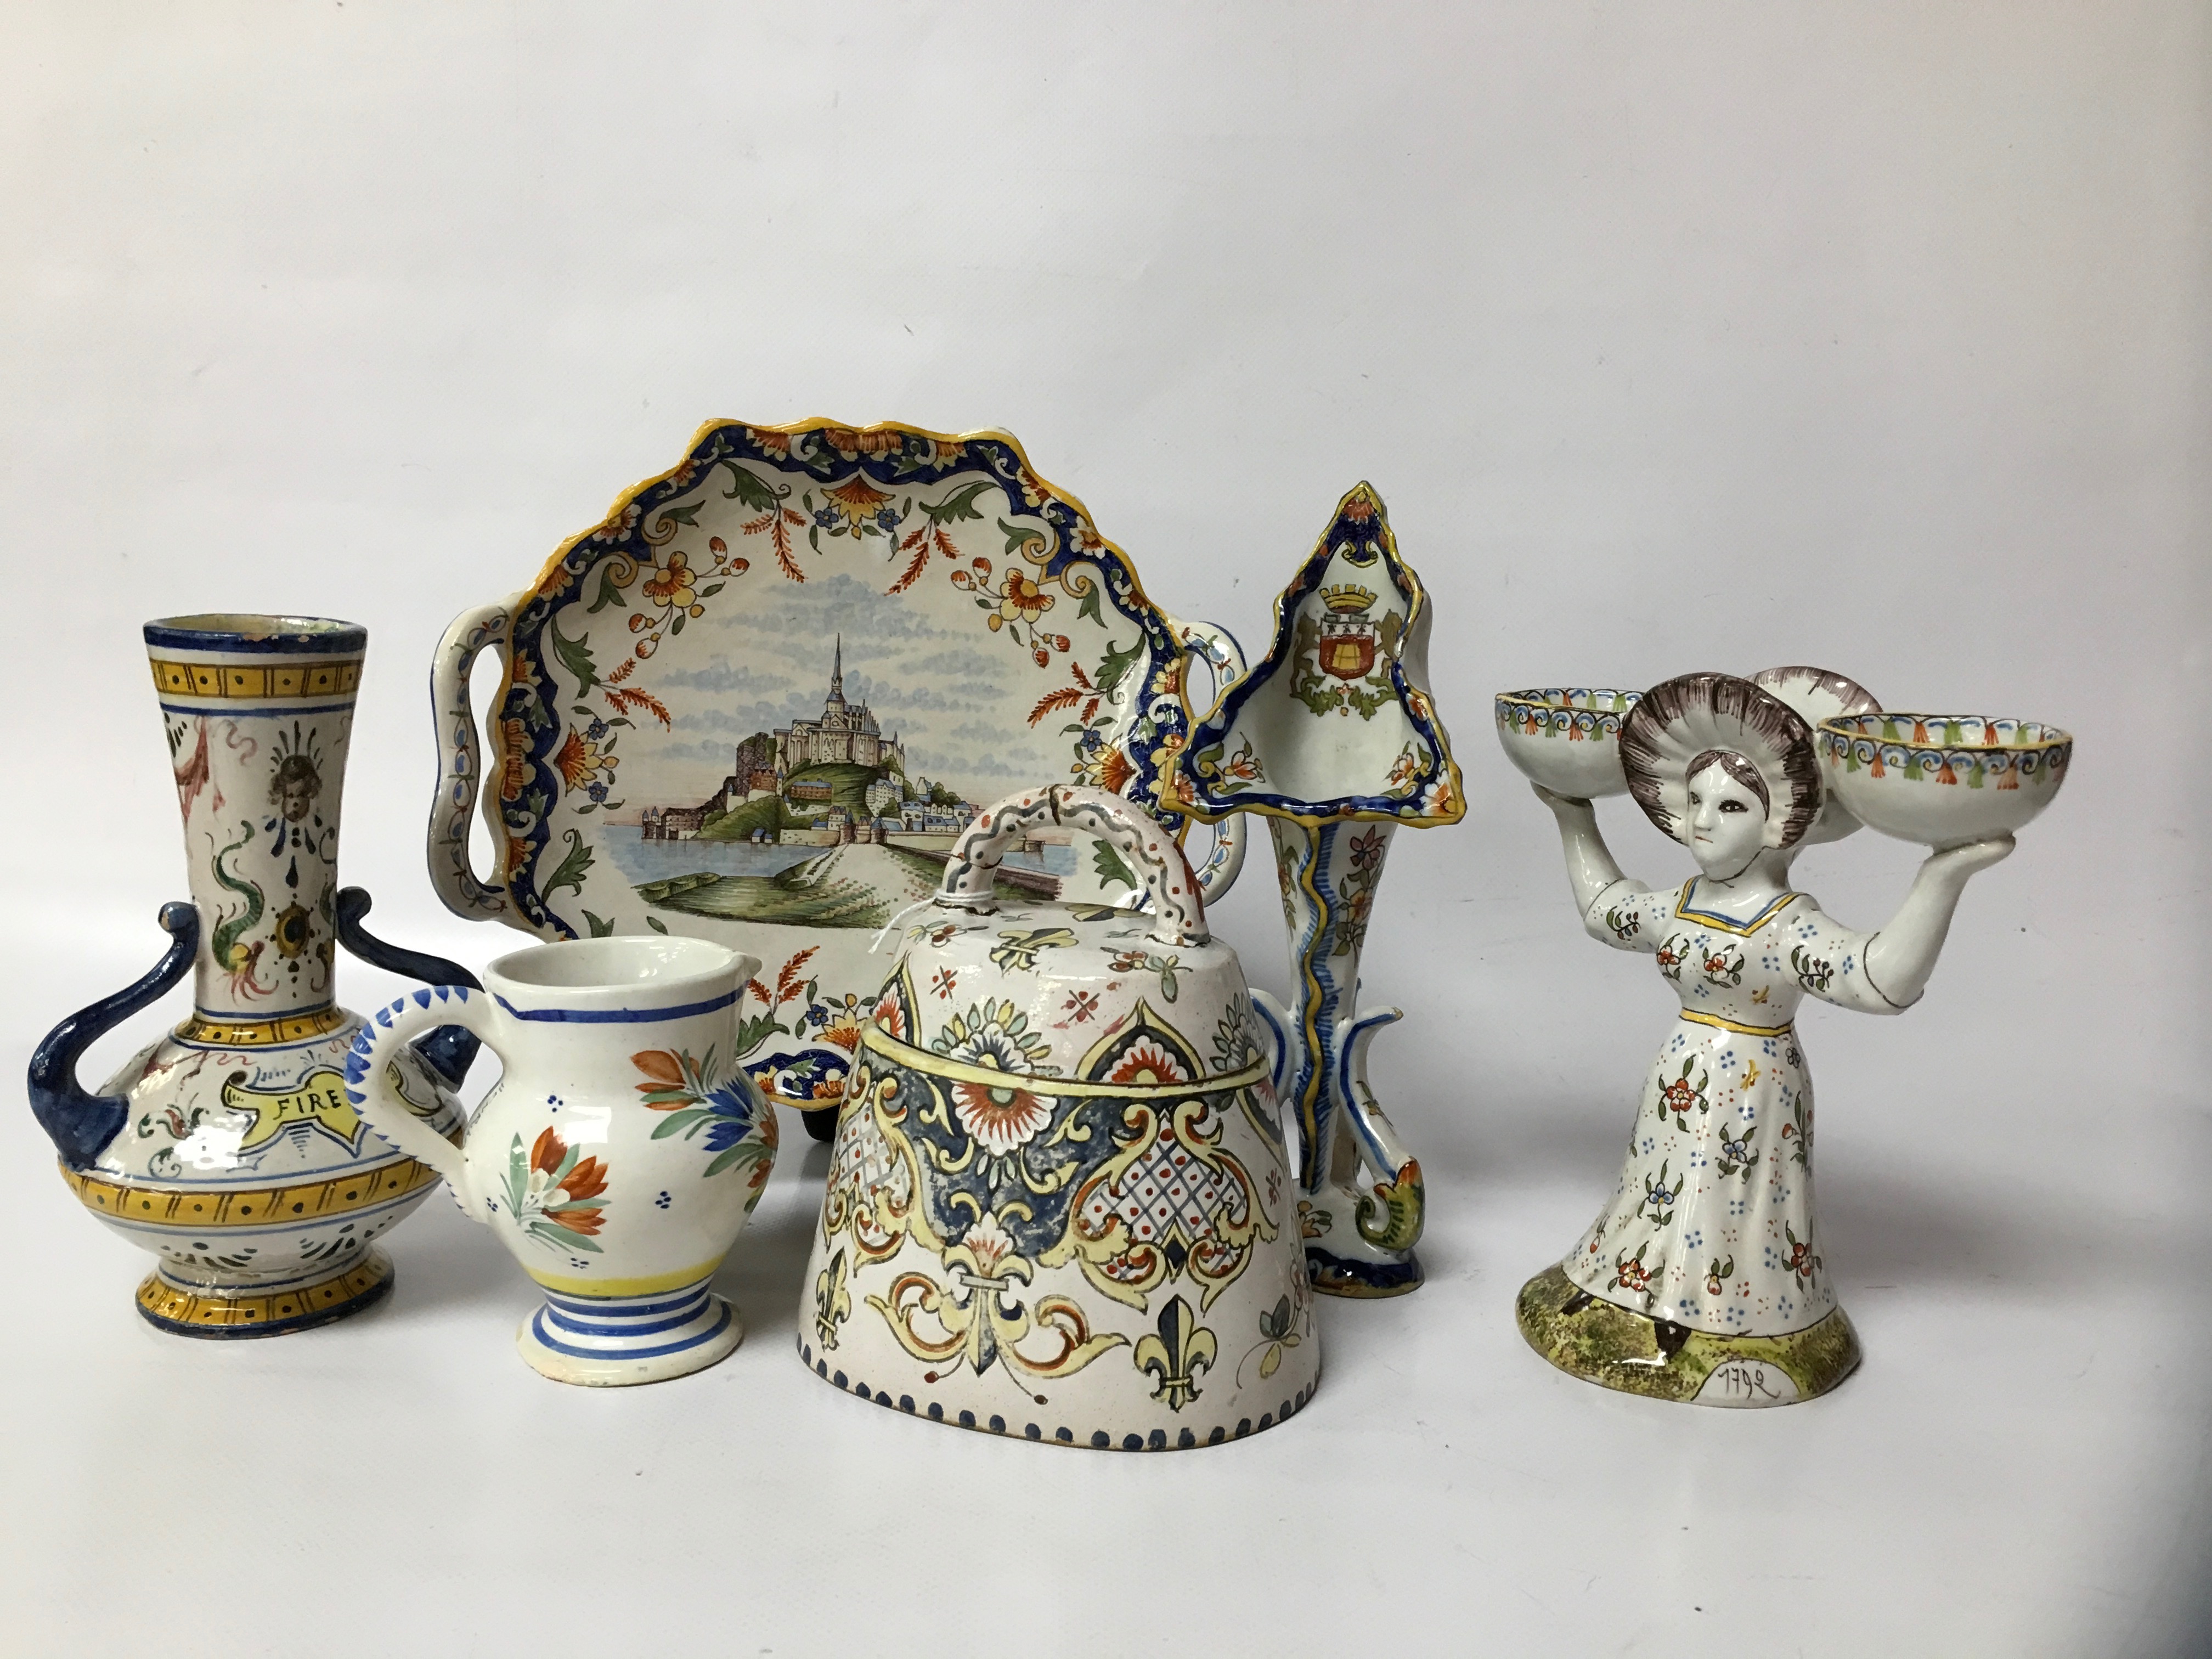 FIVE PIECES OF QUIMPER WARE AND A SIMILAR ITALIAN VASE - Image 3 of 3